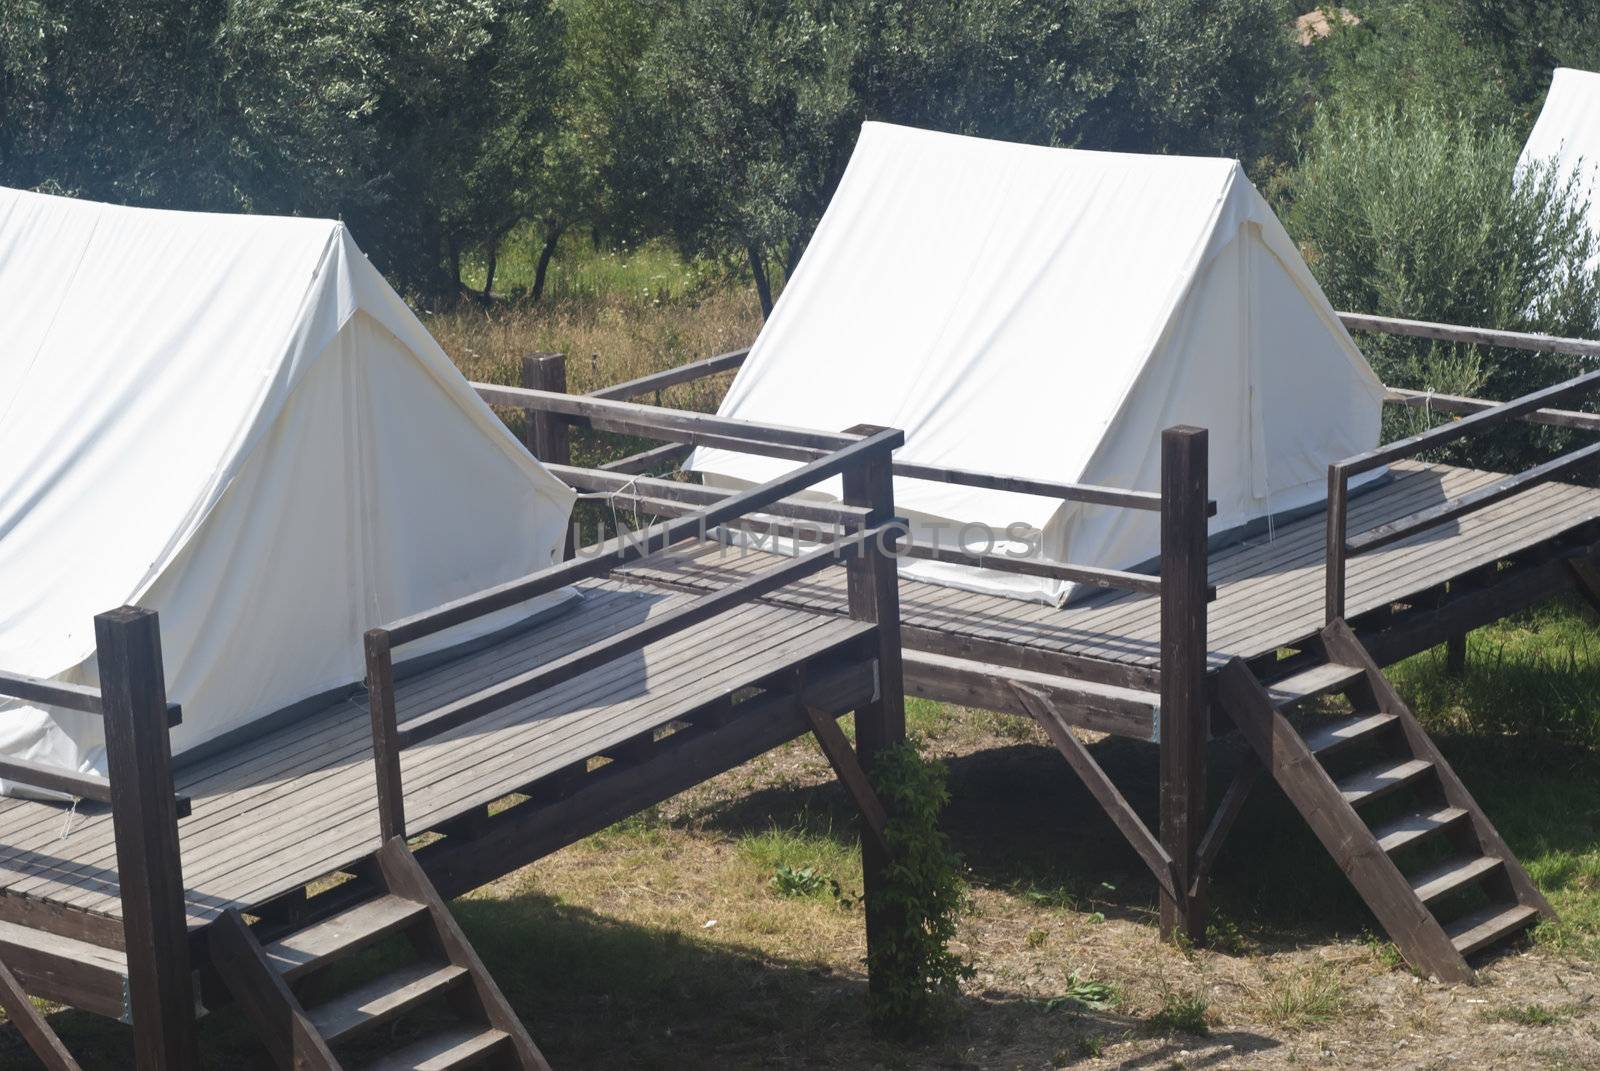 tents in touristic camping . Acquedolci, Messina, Sicily